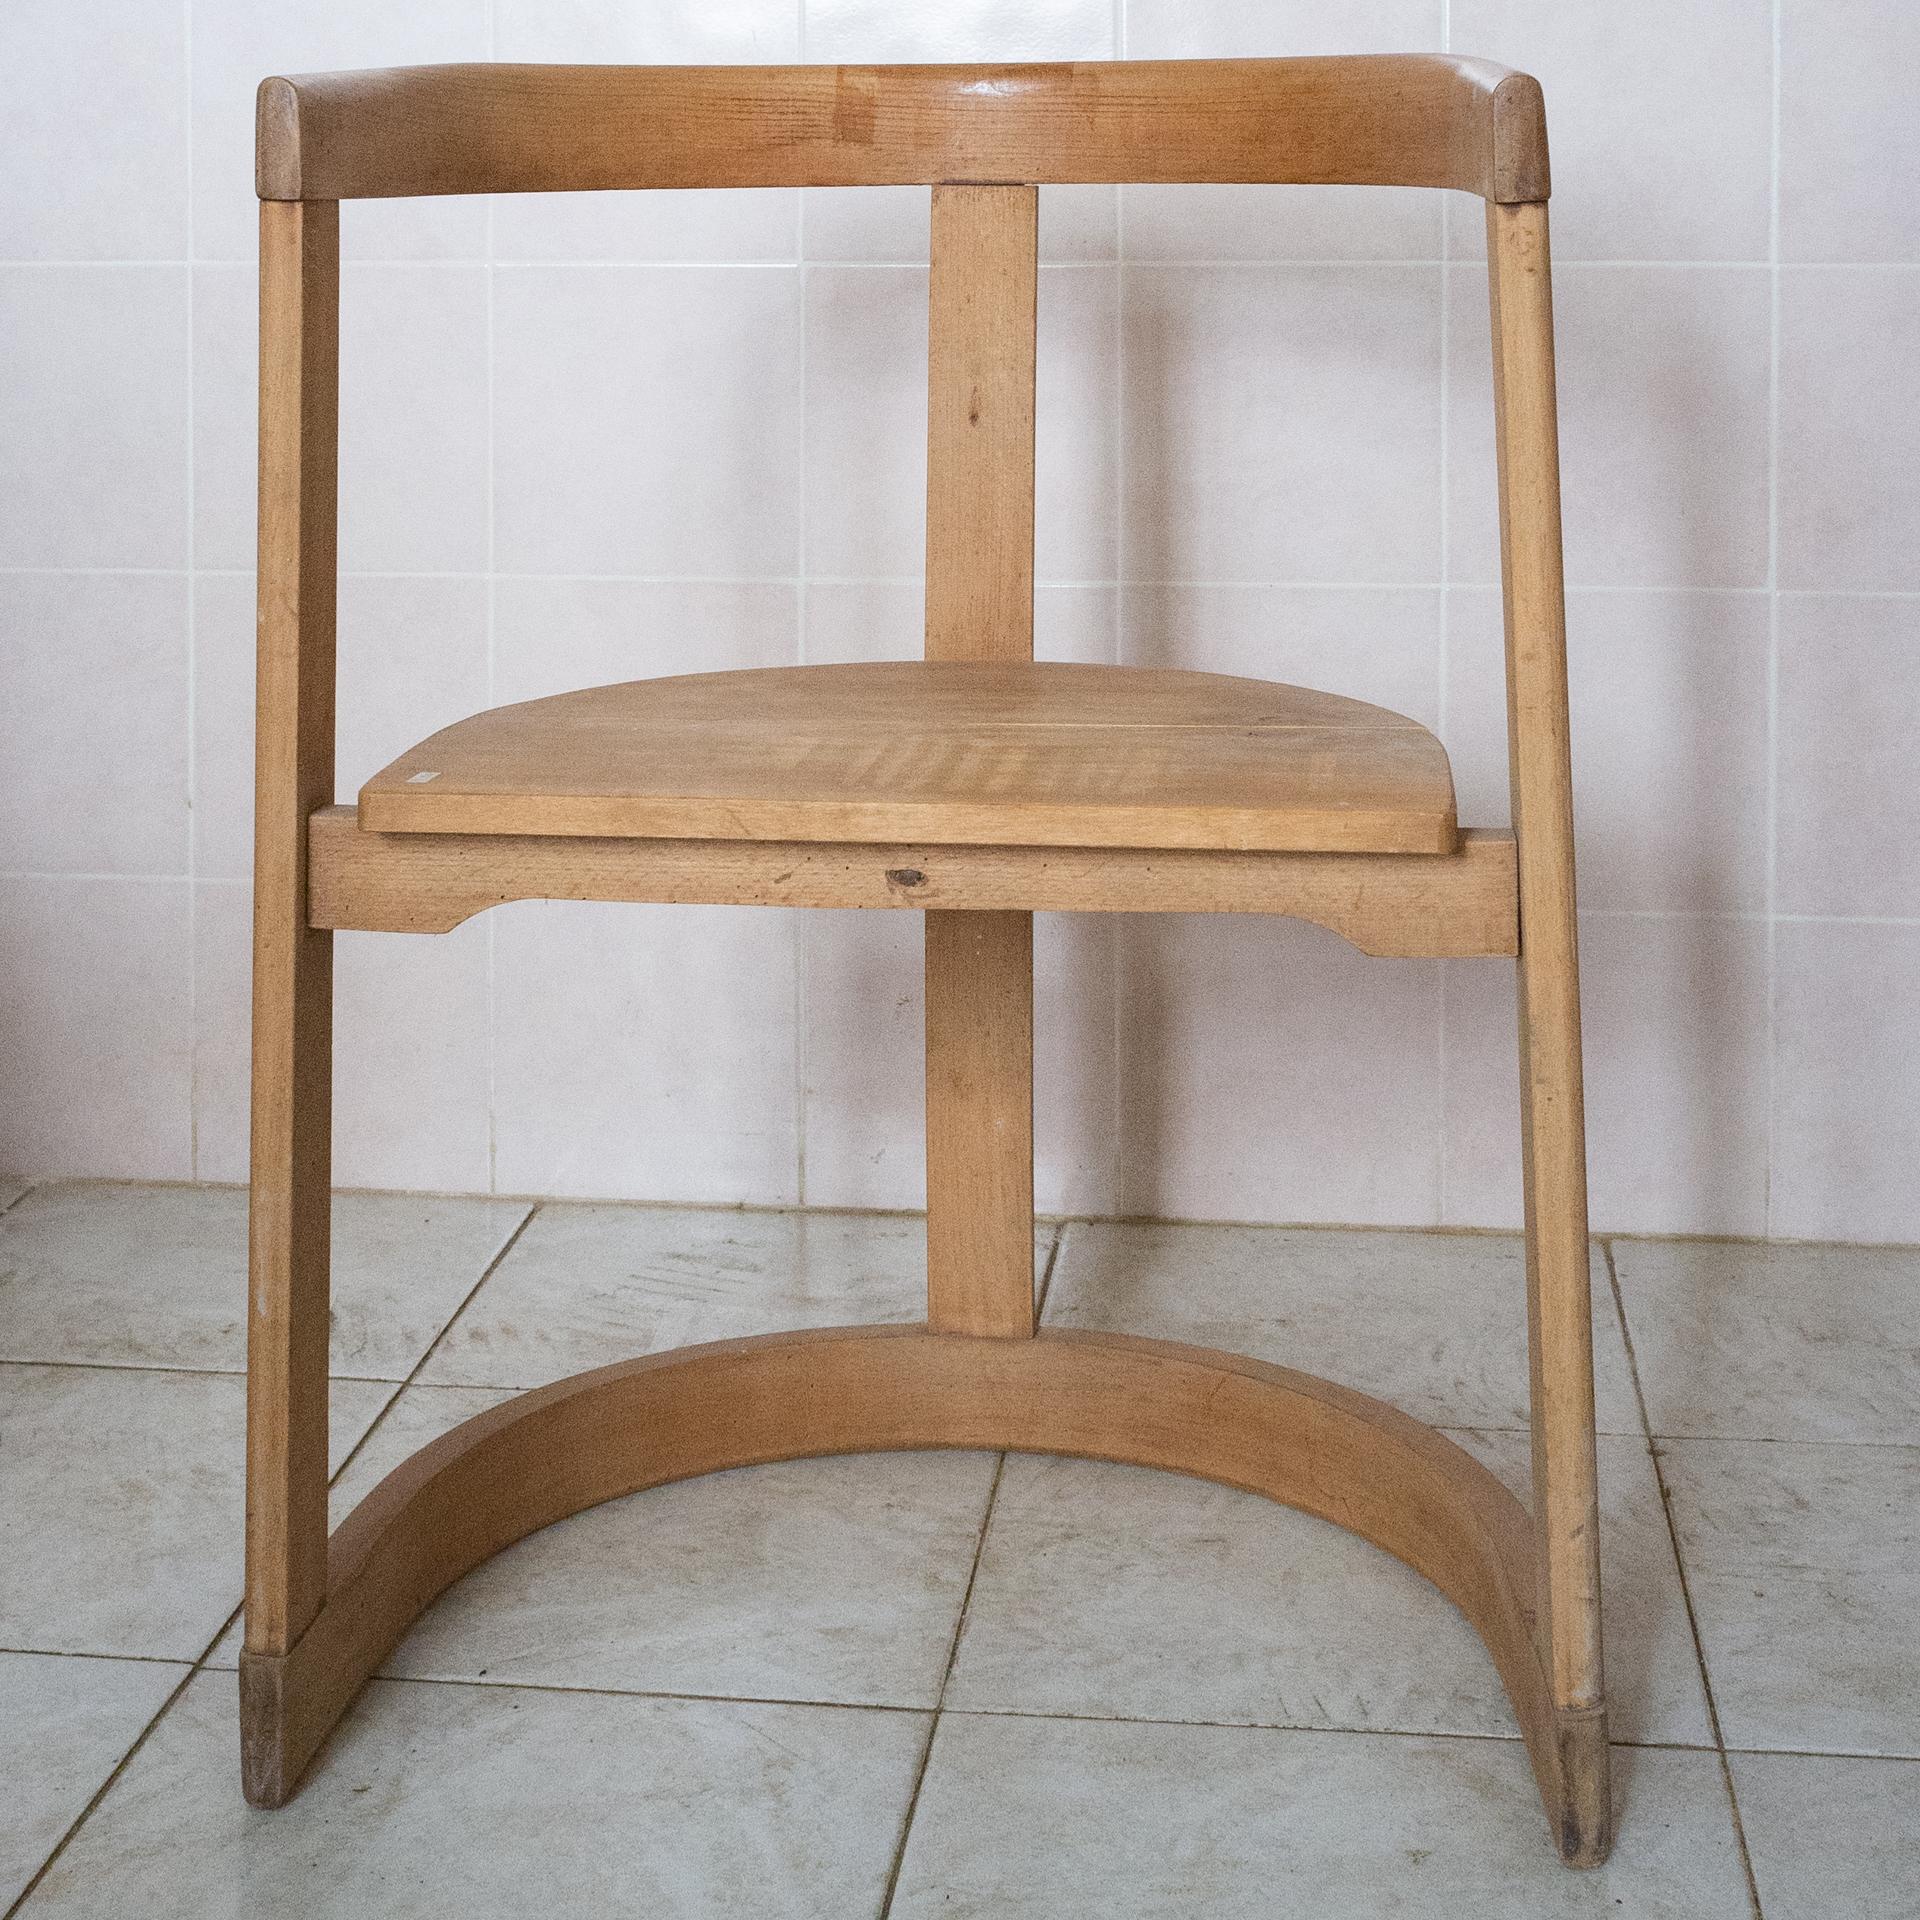 M/1026 - Vintage wooden prototype of a chair, may be a famous chair. Look to : Catilina chair, Azucena 1958, by Luigi Caccia Dominioni. I found it many years ago in an old Lombard warehouse. 
May it be the prototype of that famous chair ?.